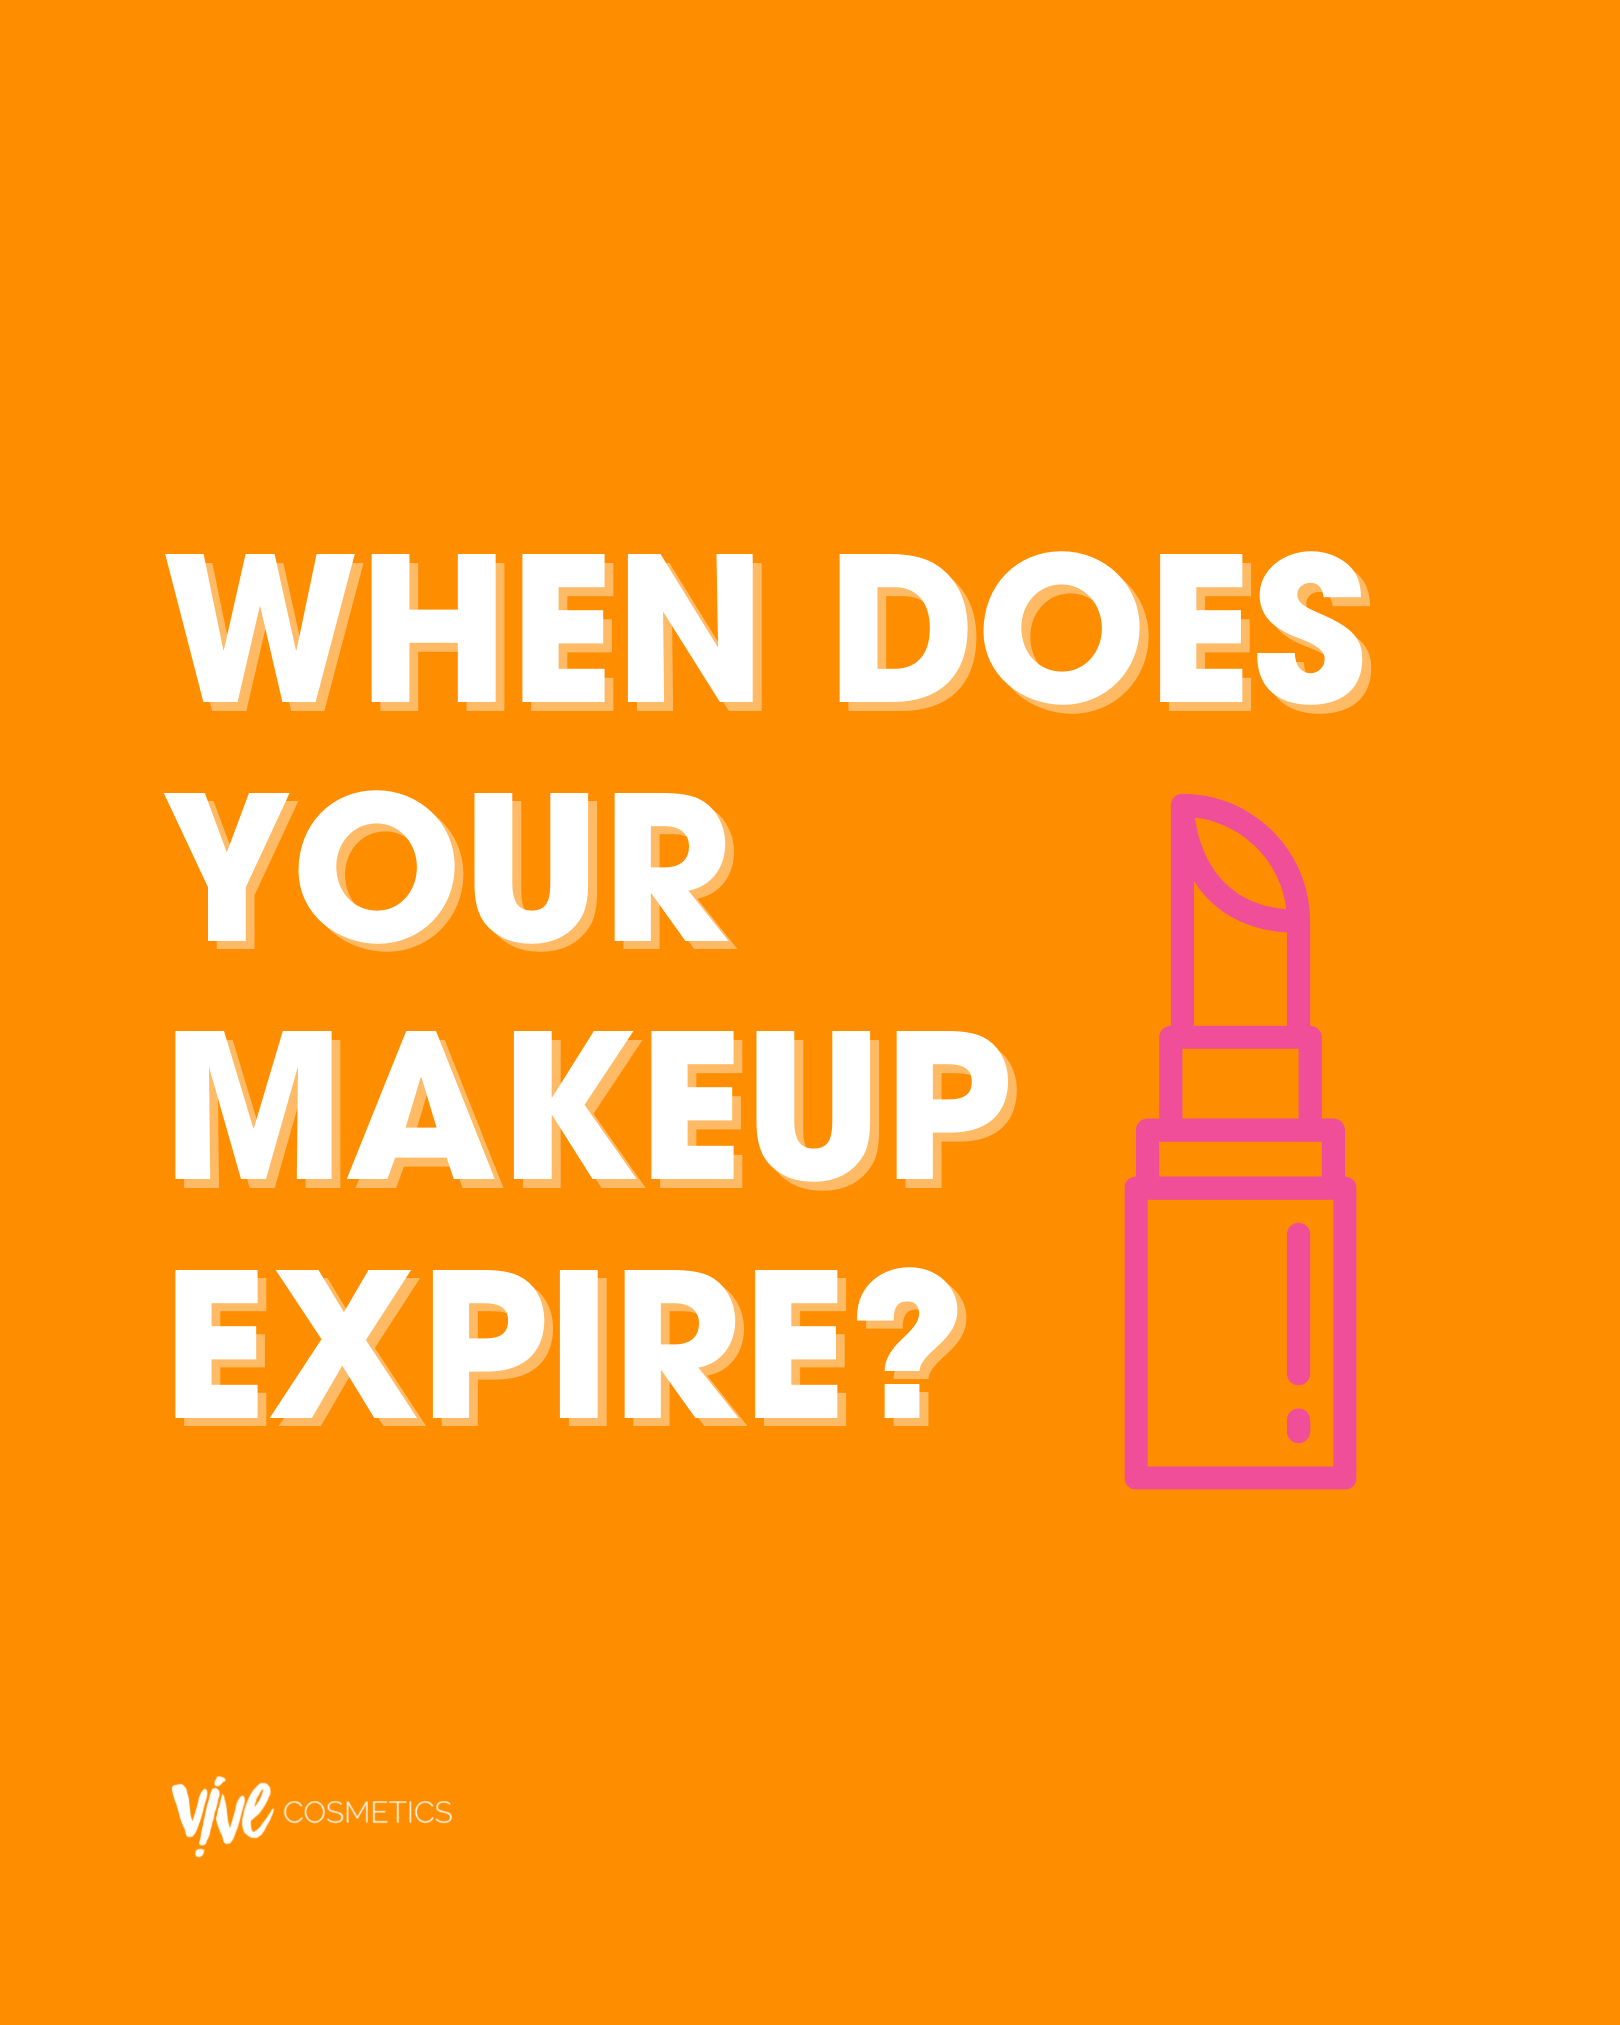 When does your makeup expire?